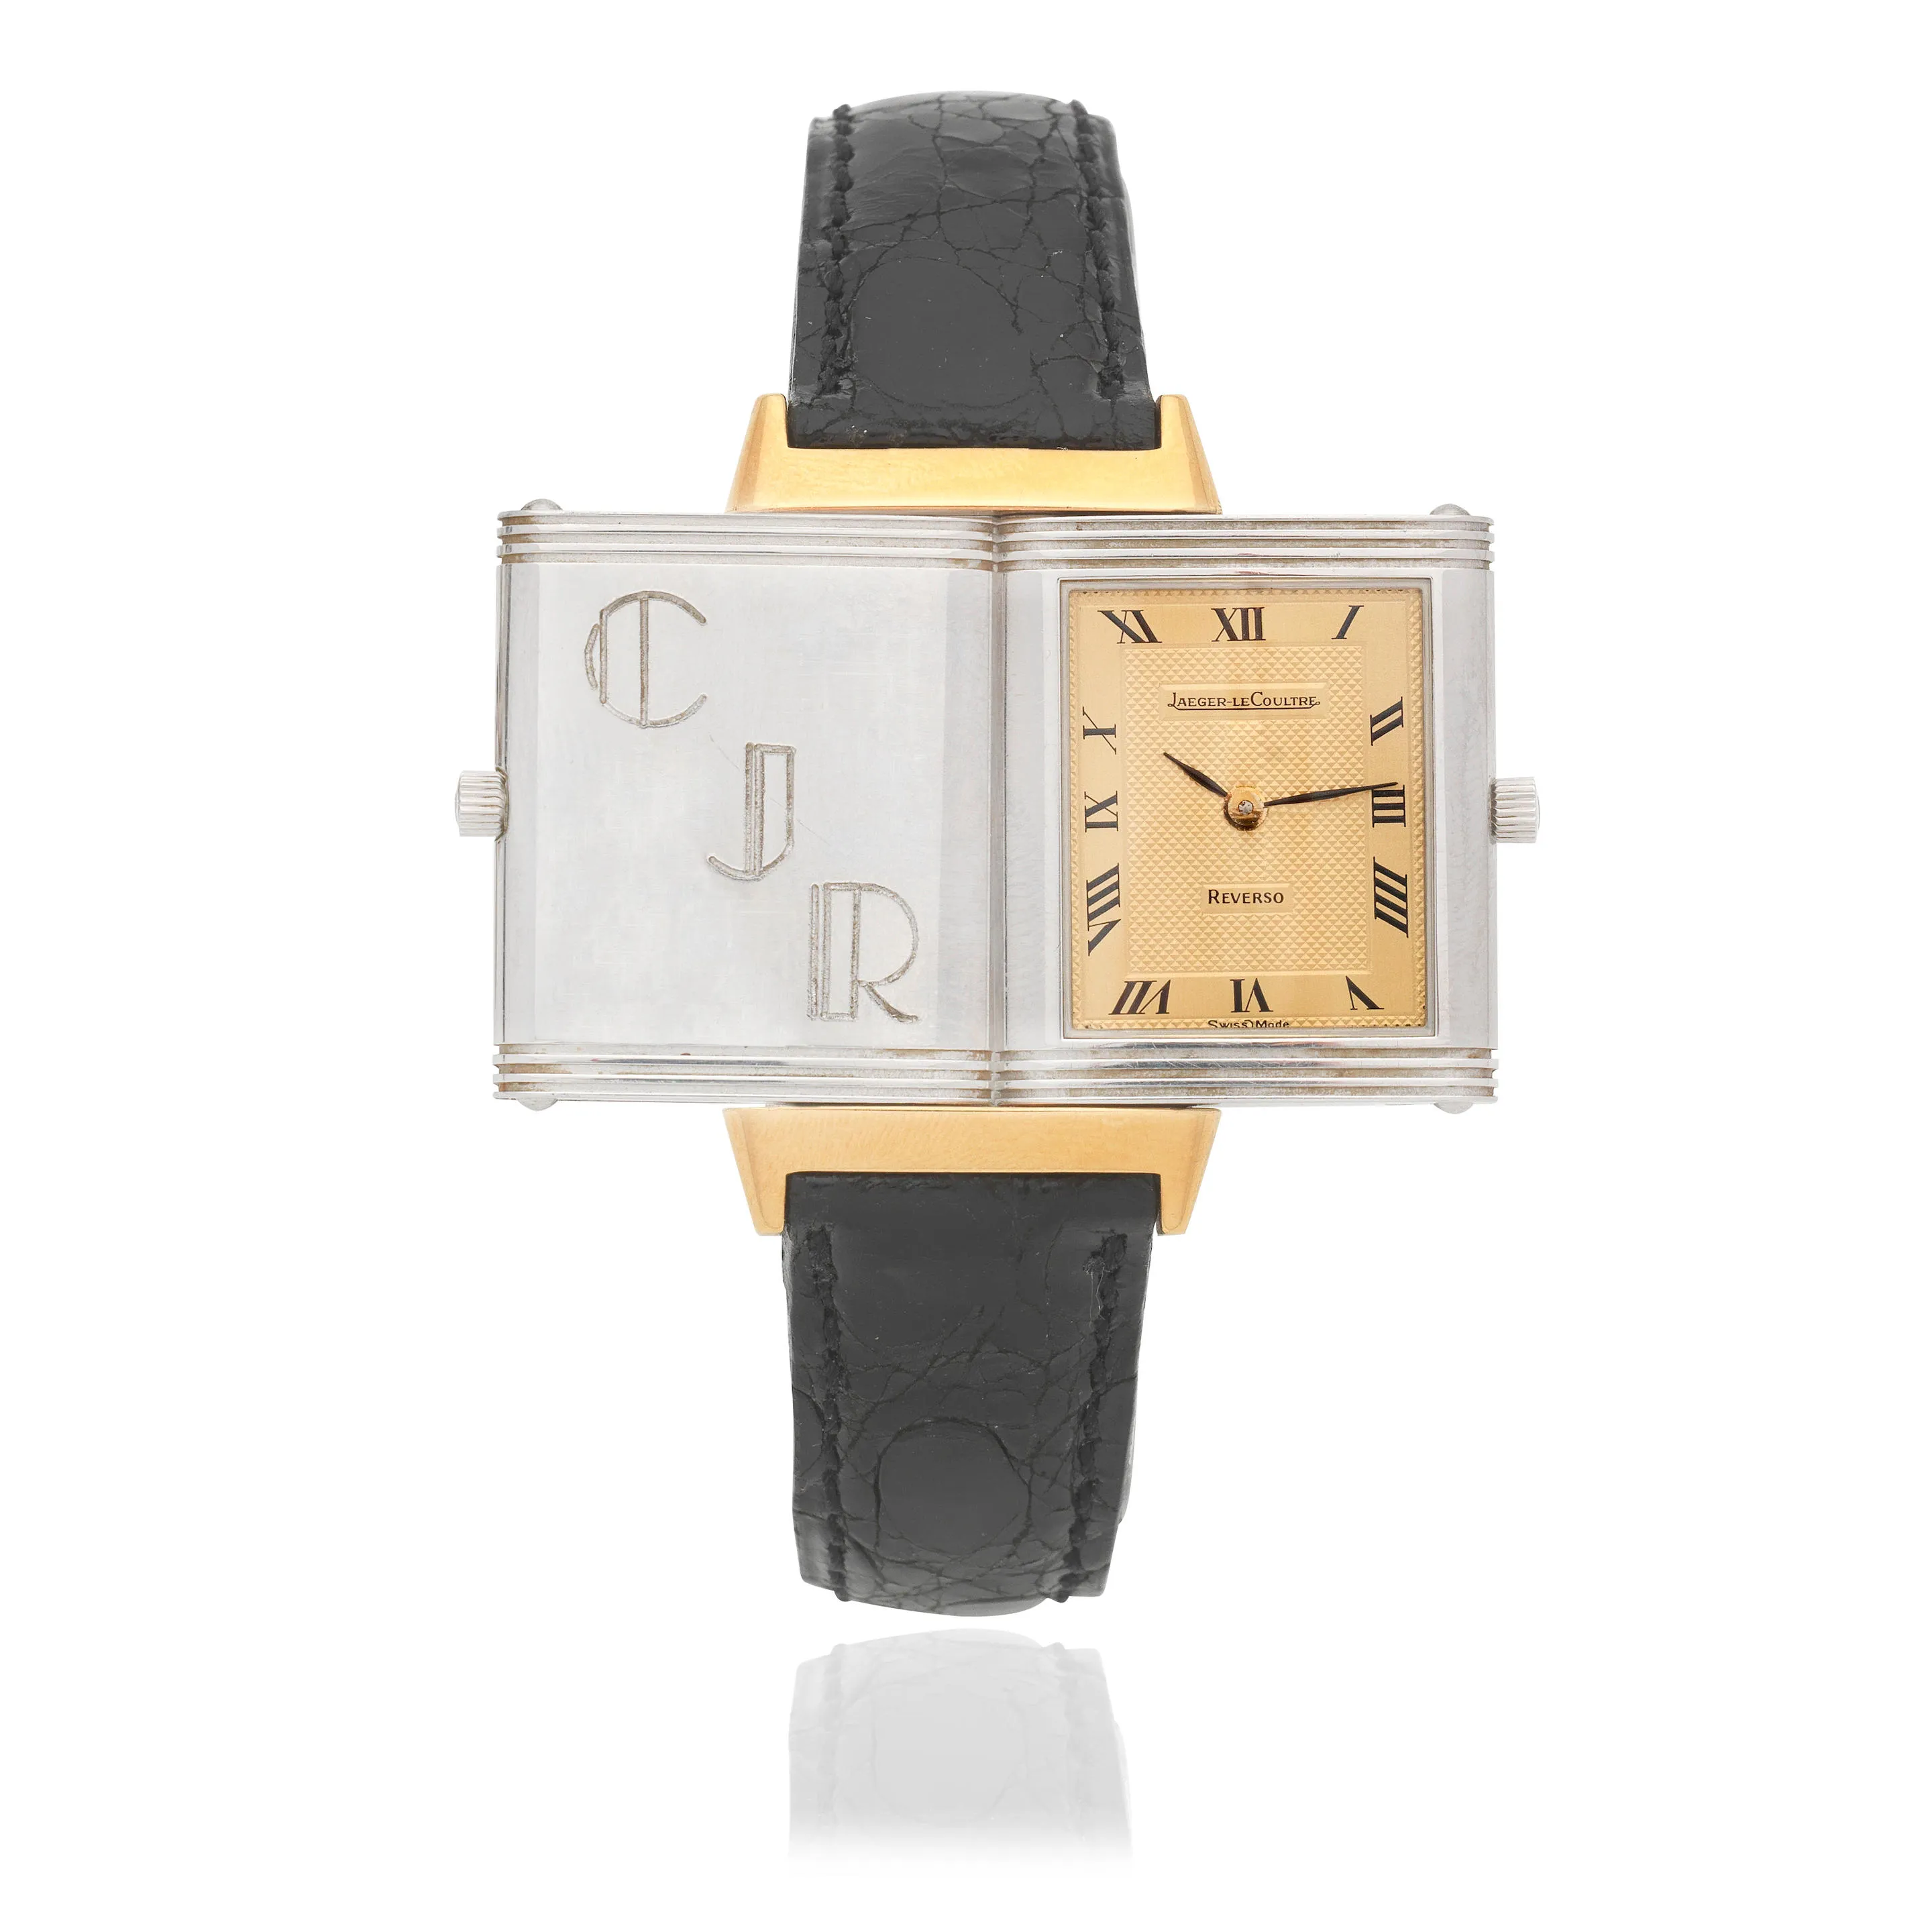 Jaeger-LeCoultre Reverso 140.251.5 23mm Steel & gold Champagne